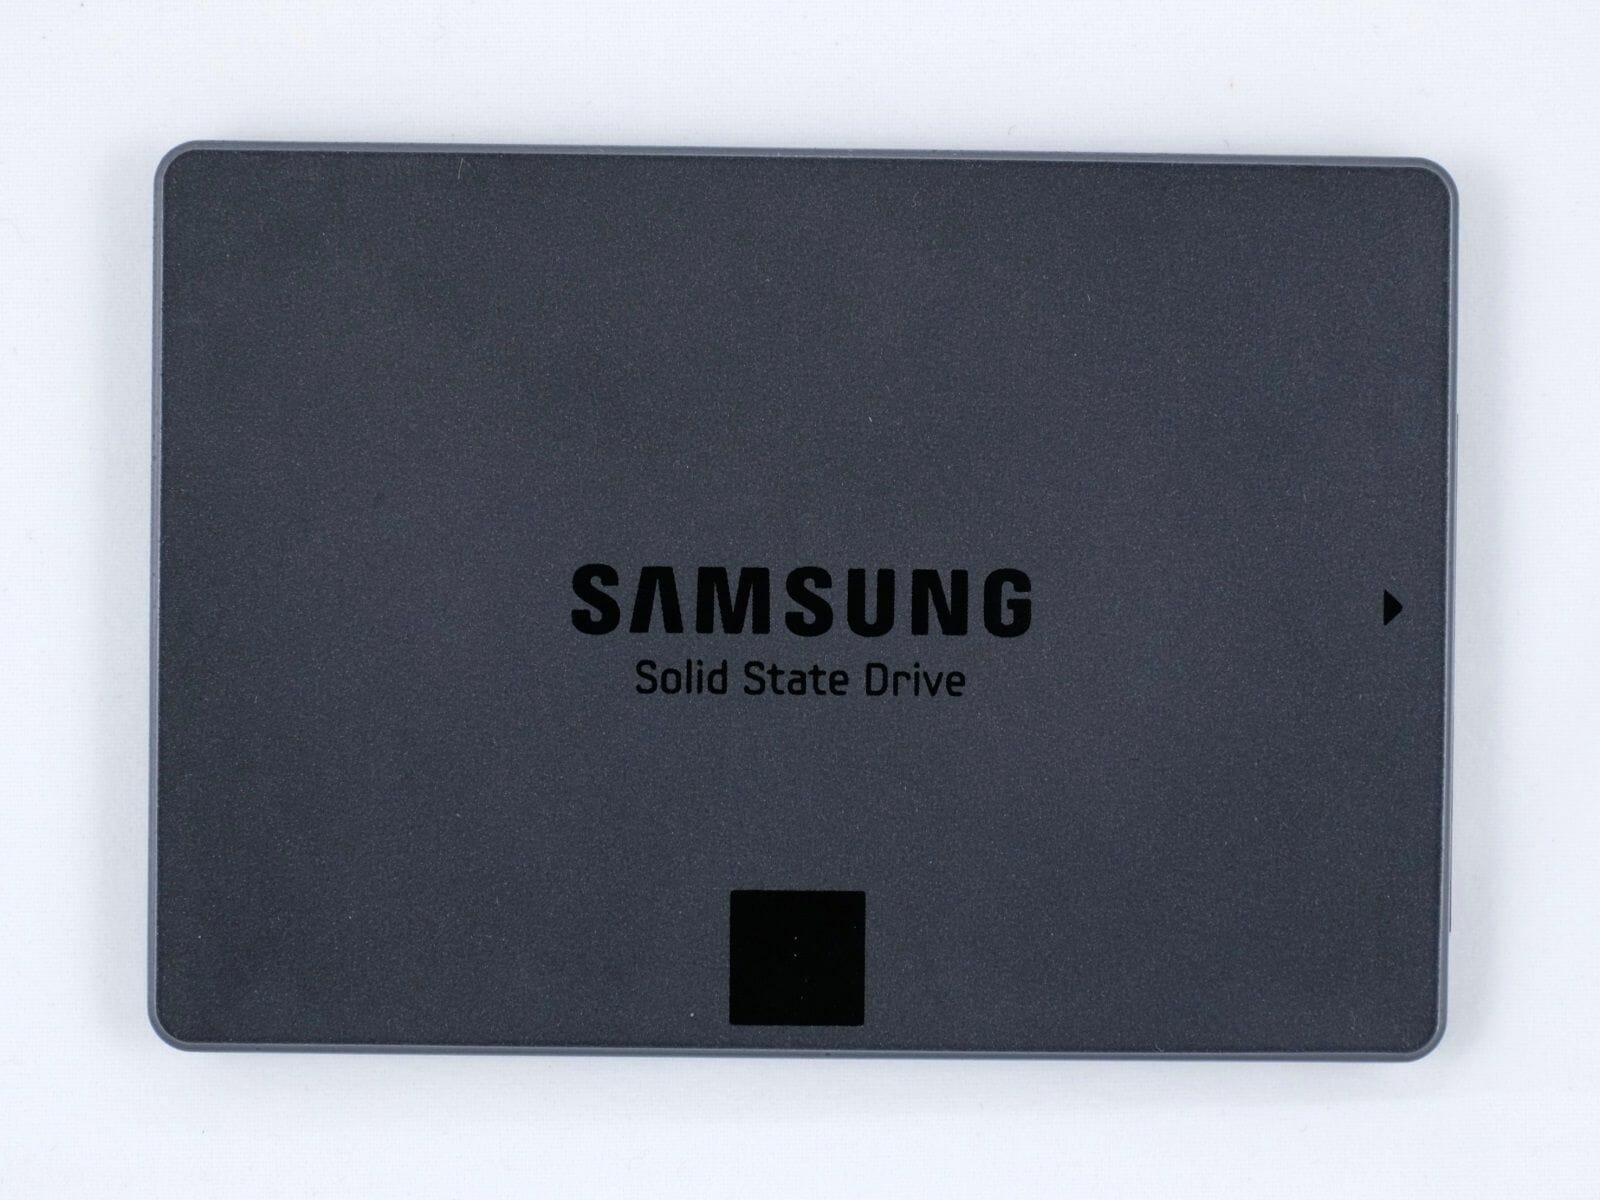 2 samsung solid state drive